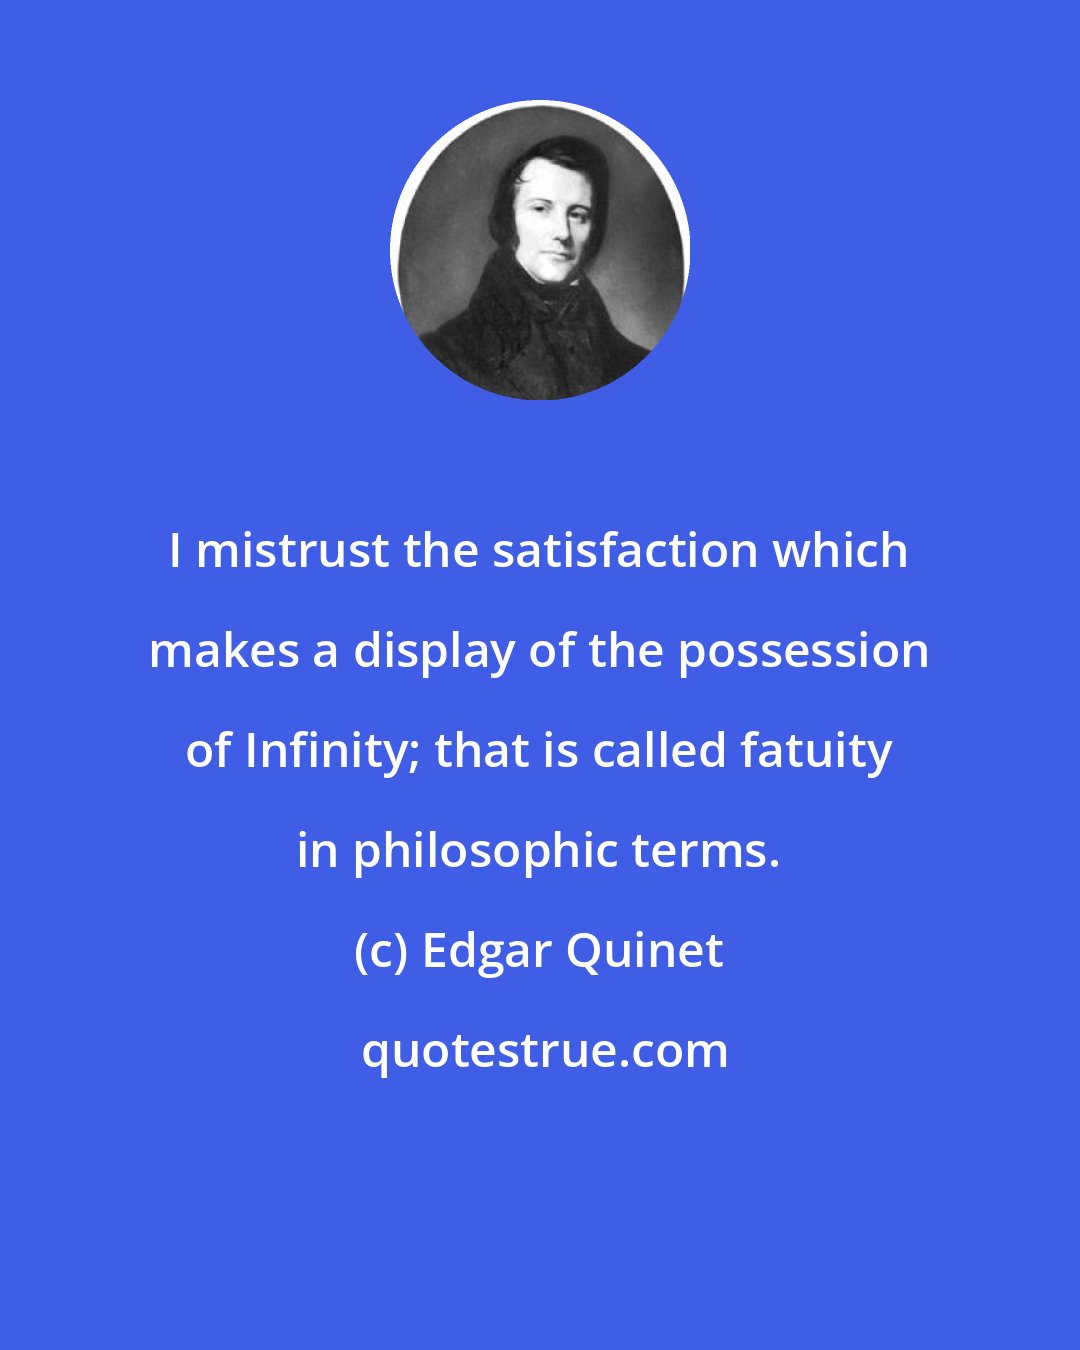 Edgar Quinet: I mistrust the satisfaction which makes a display of the possession of Infinity; that is called fatuity in philosophic terms.